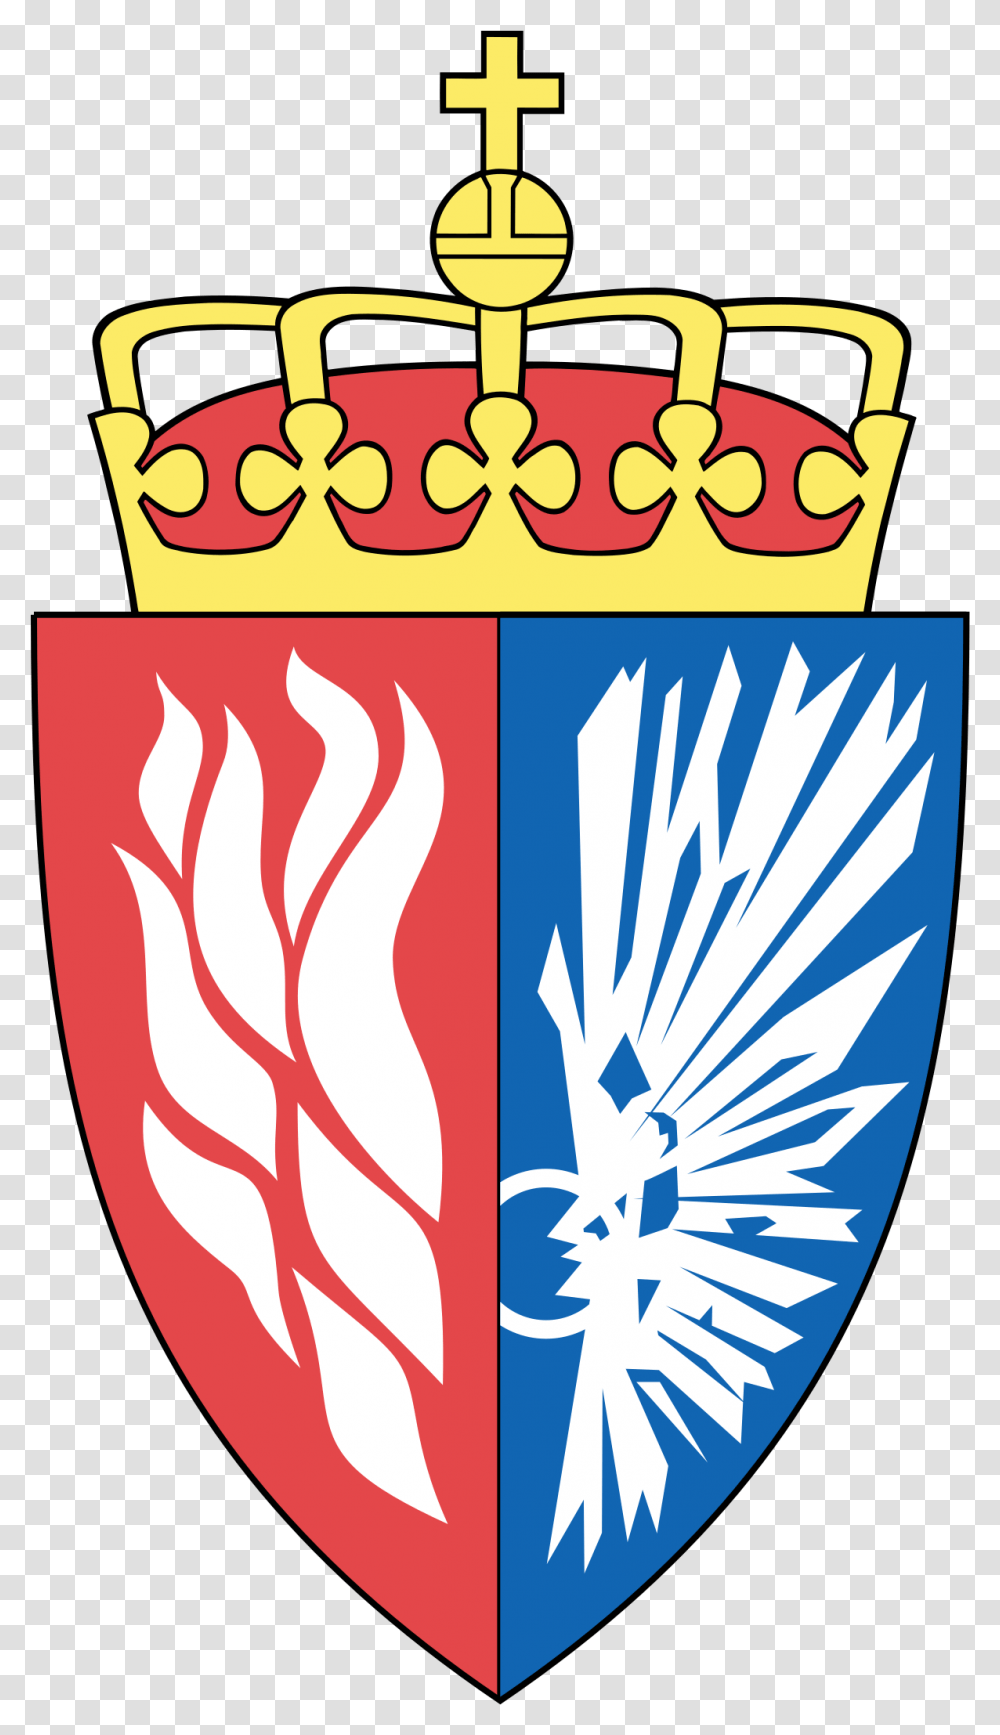 Filecoat Of Arms The Norwegian Directorate For Fire And Norway Coat Of Arms, Logo, Symbol, Emblem, Text Transparent Png